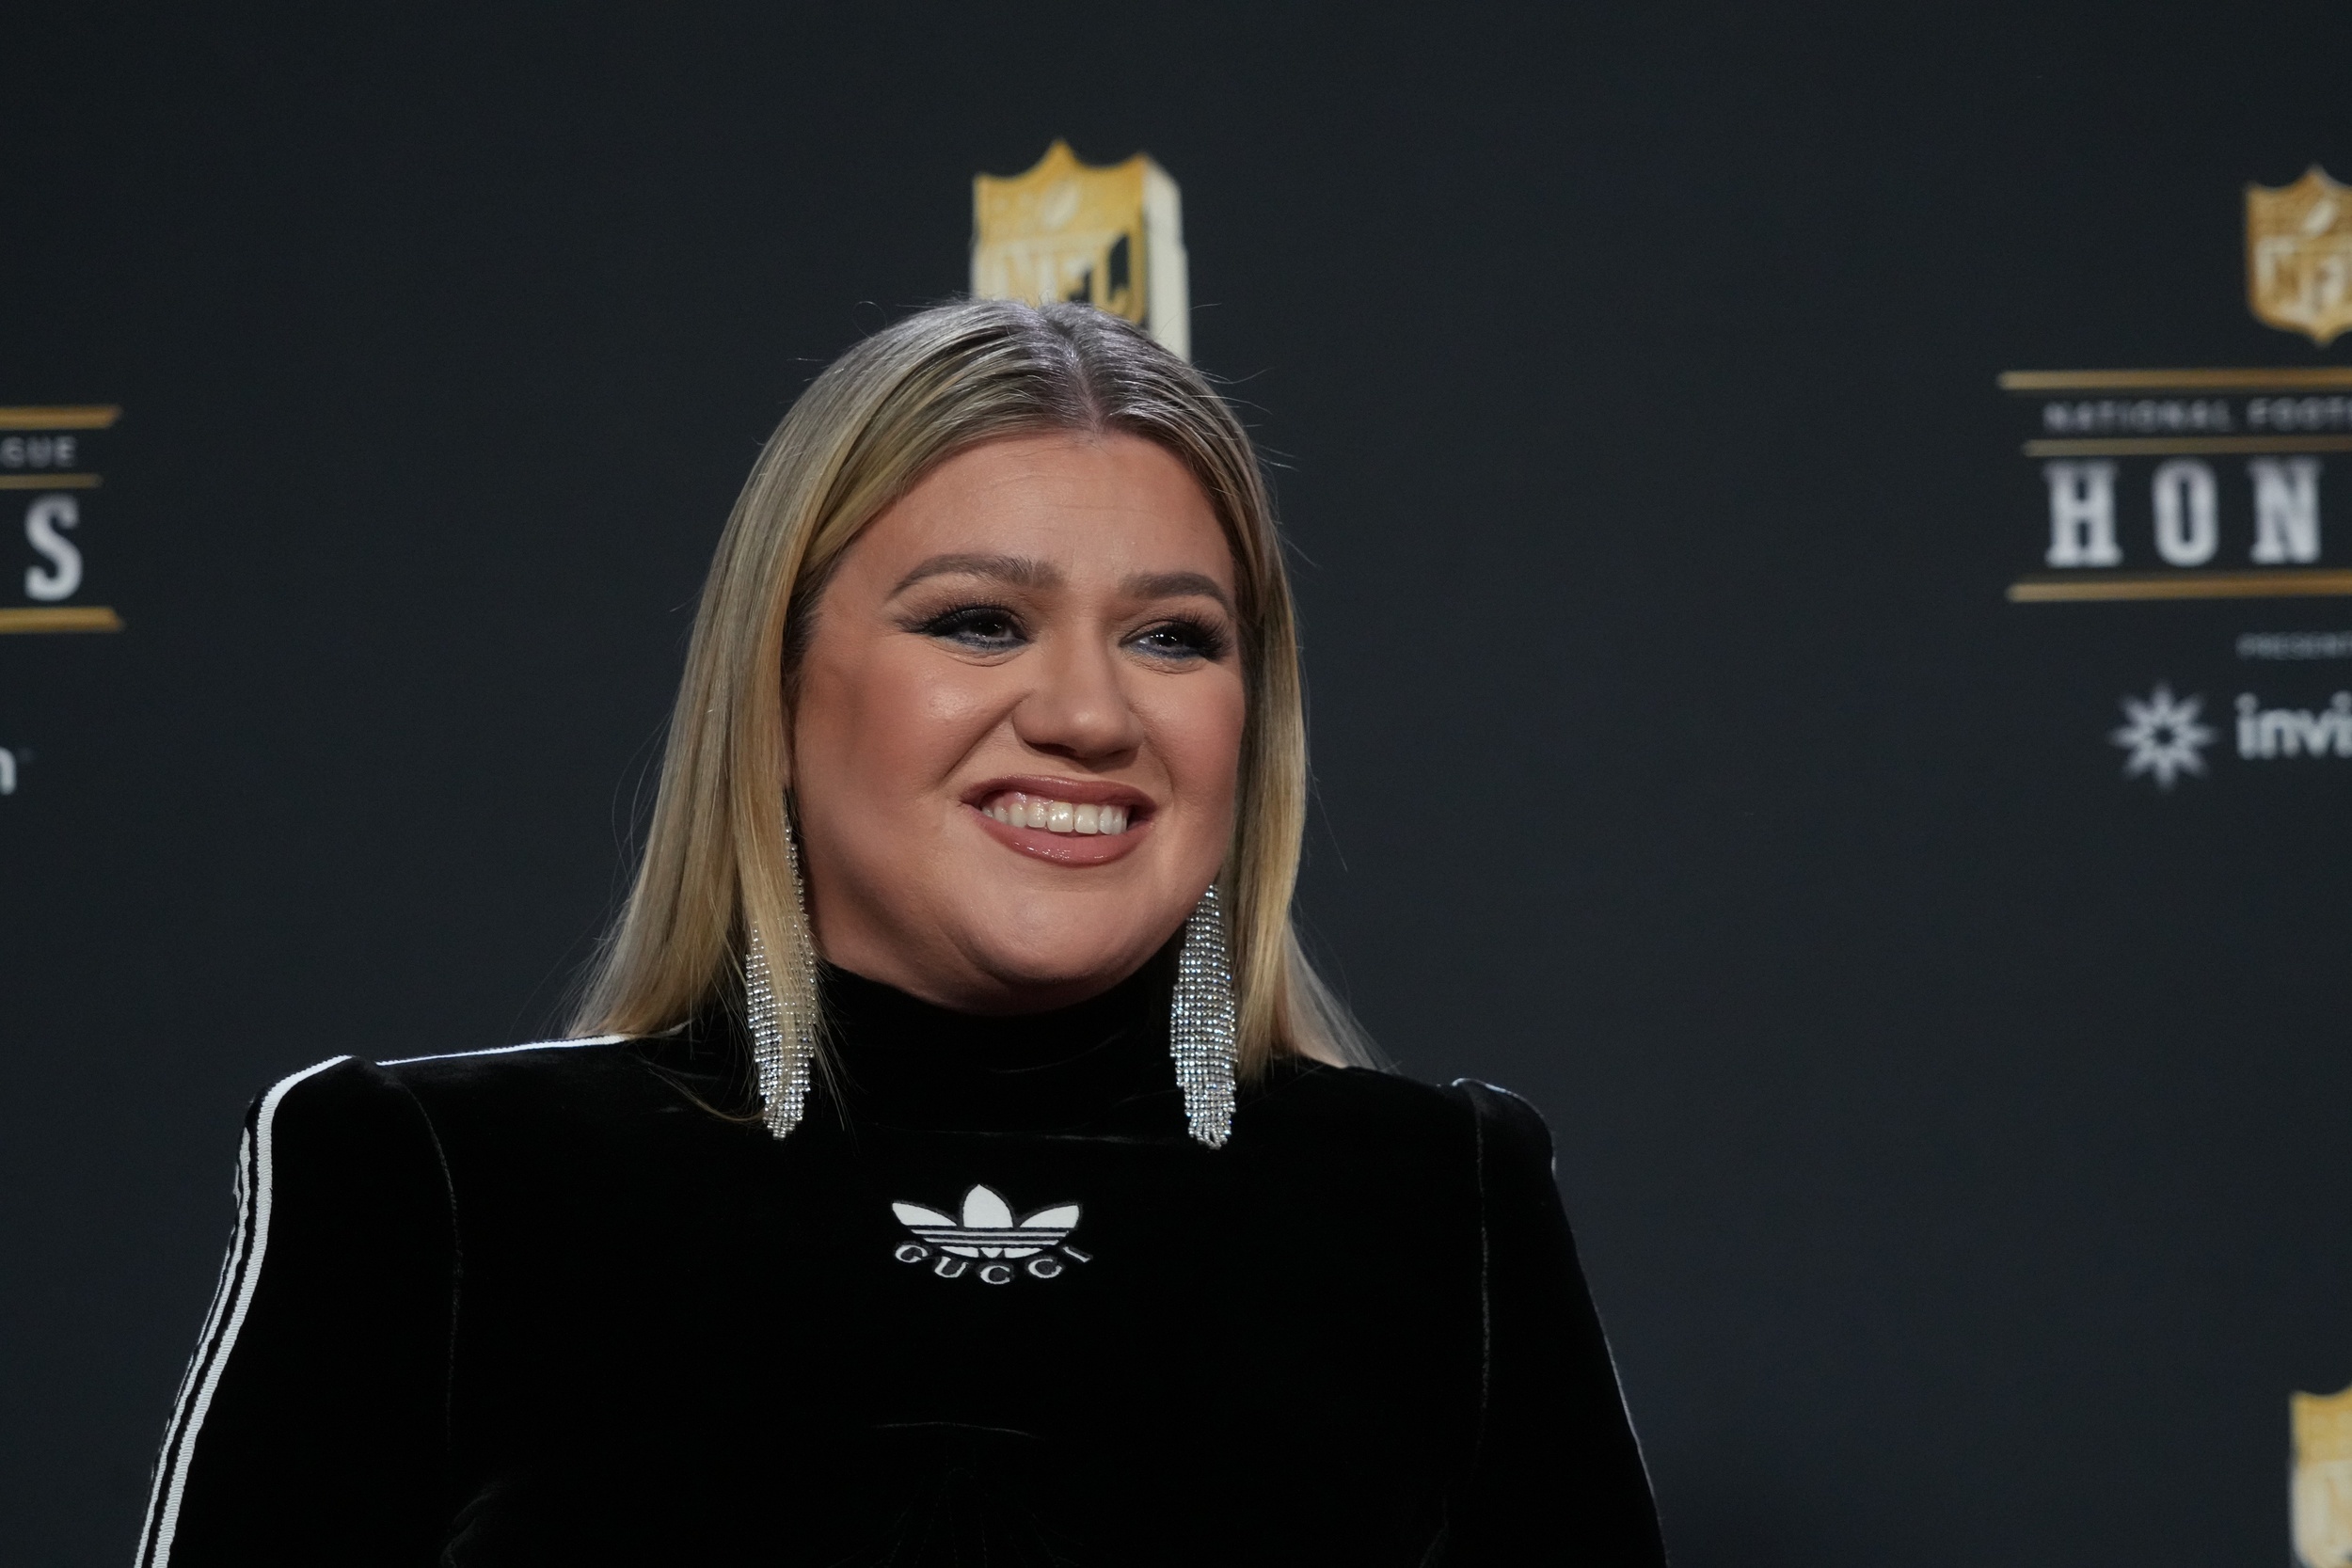 <p>Kelly Clarkson is no stranger to creating music that'll make you want to sing along. We're talking "Stronger," "Miss Independent," and, of course, "Since U Been Gone." The latter features an explosive chorus tailor-made for your next road trip playlist.</p><p>You may also like: <a href='https://www.yardbarker.com/entertainment/articles/20_popular_songs_you_didnt_know_were_meant_for_other_artists/s1__40341021'>20 popular songs you didn't know were meant for other artists</a></p>